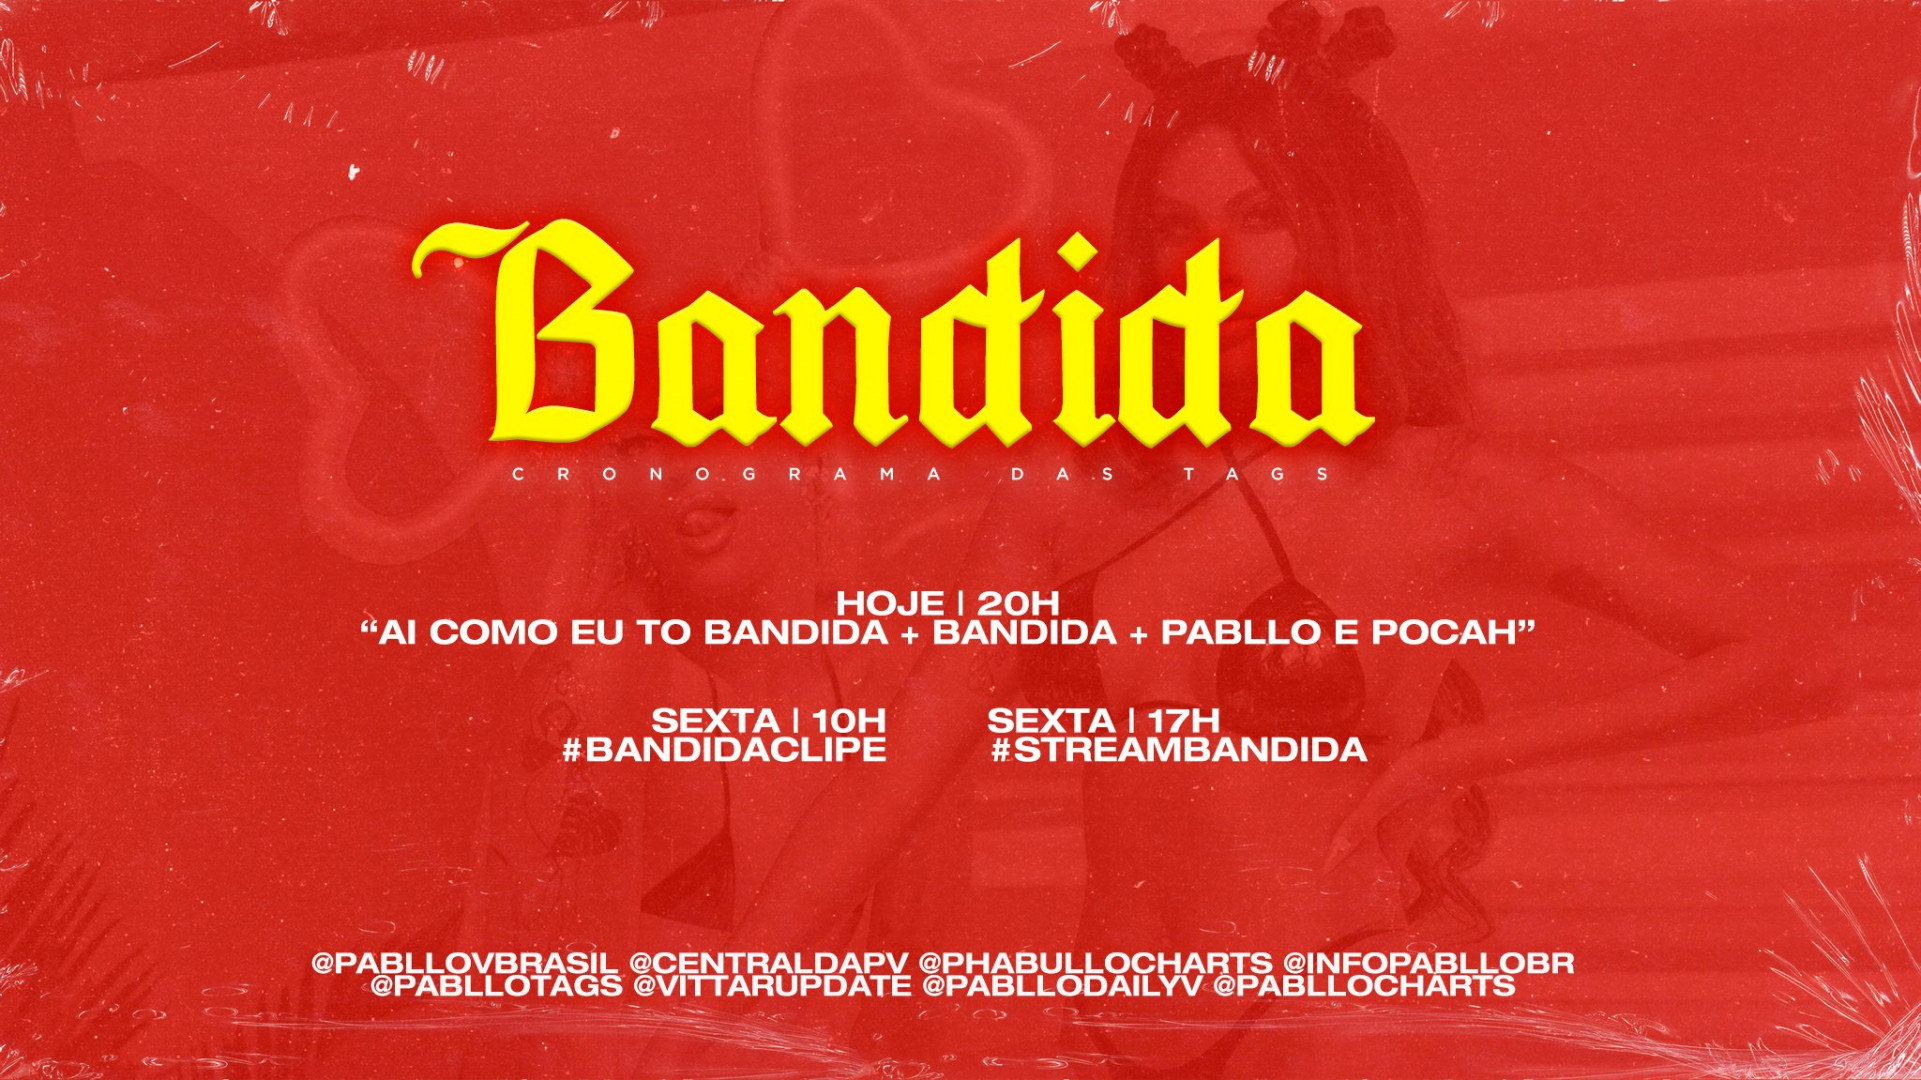 What's this font? "BANDIDA"